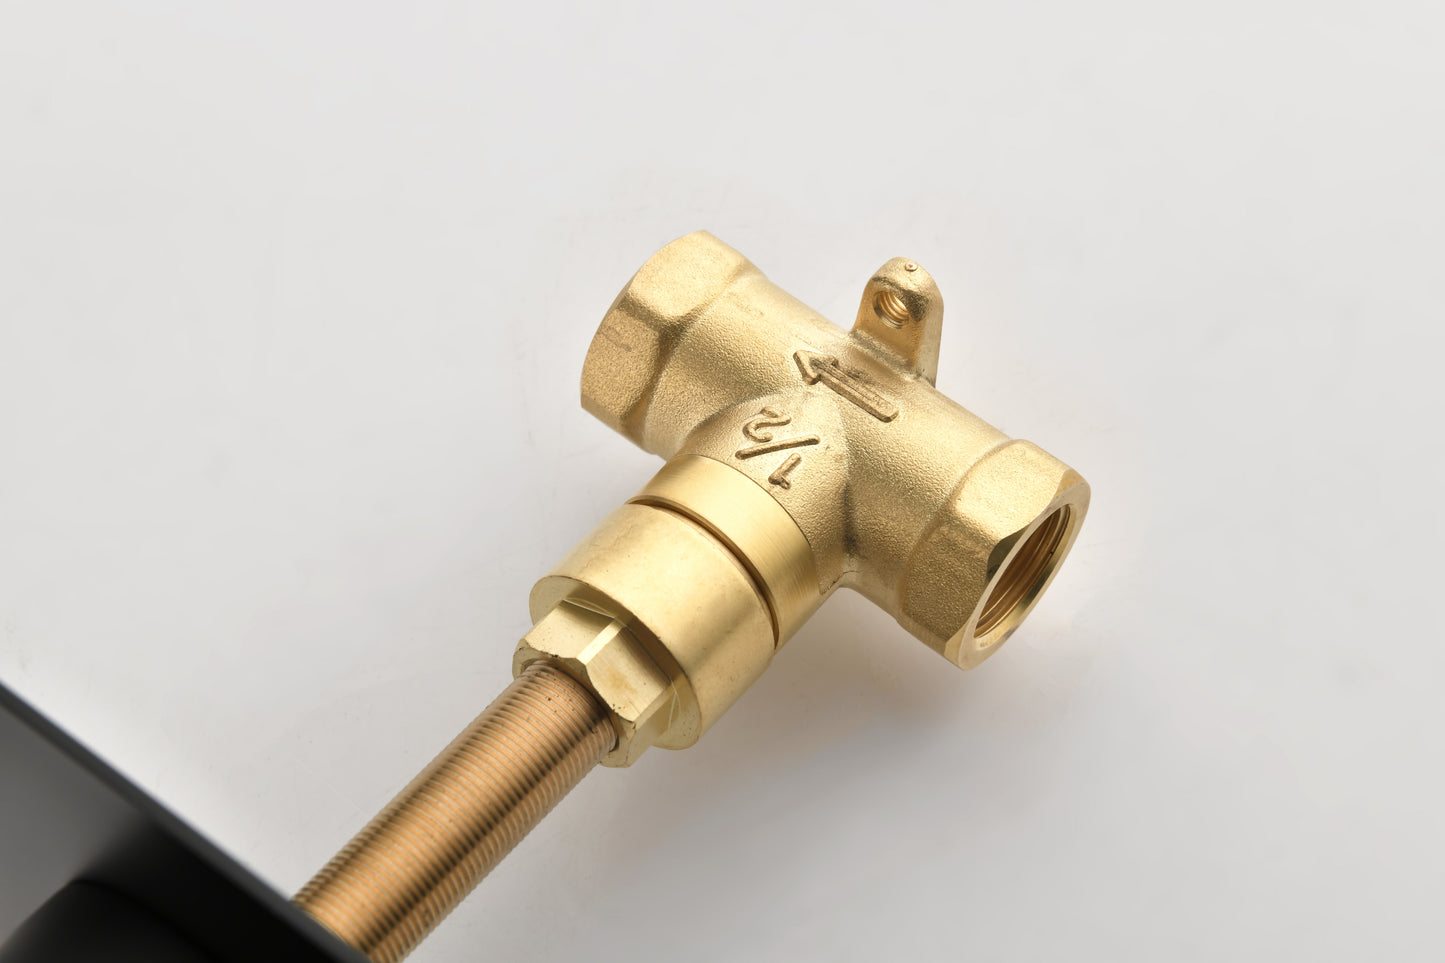 3/4" Cast Metal Volume Control Valve 3-Piece Extra High Flow Master Shower Volume Control
Adjustable brass handle valve body, 1 piece each on the left and right